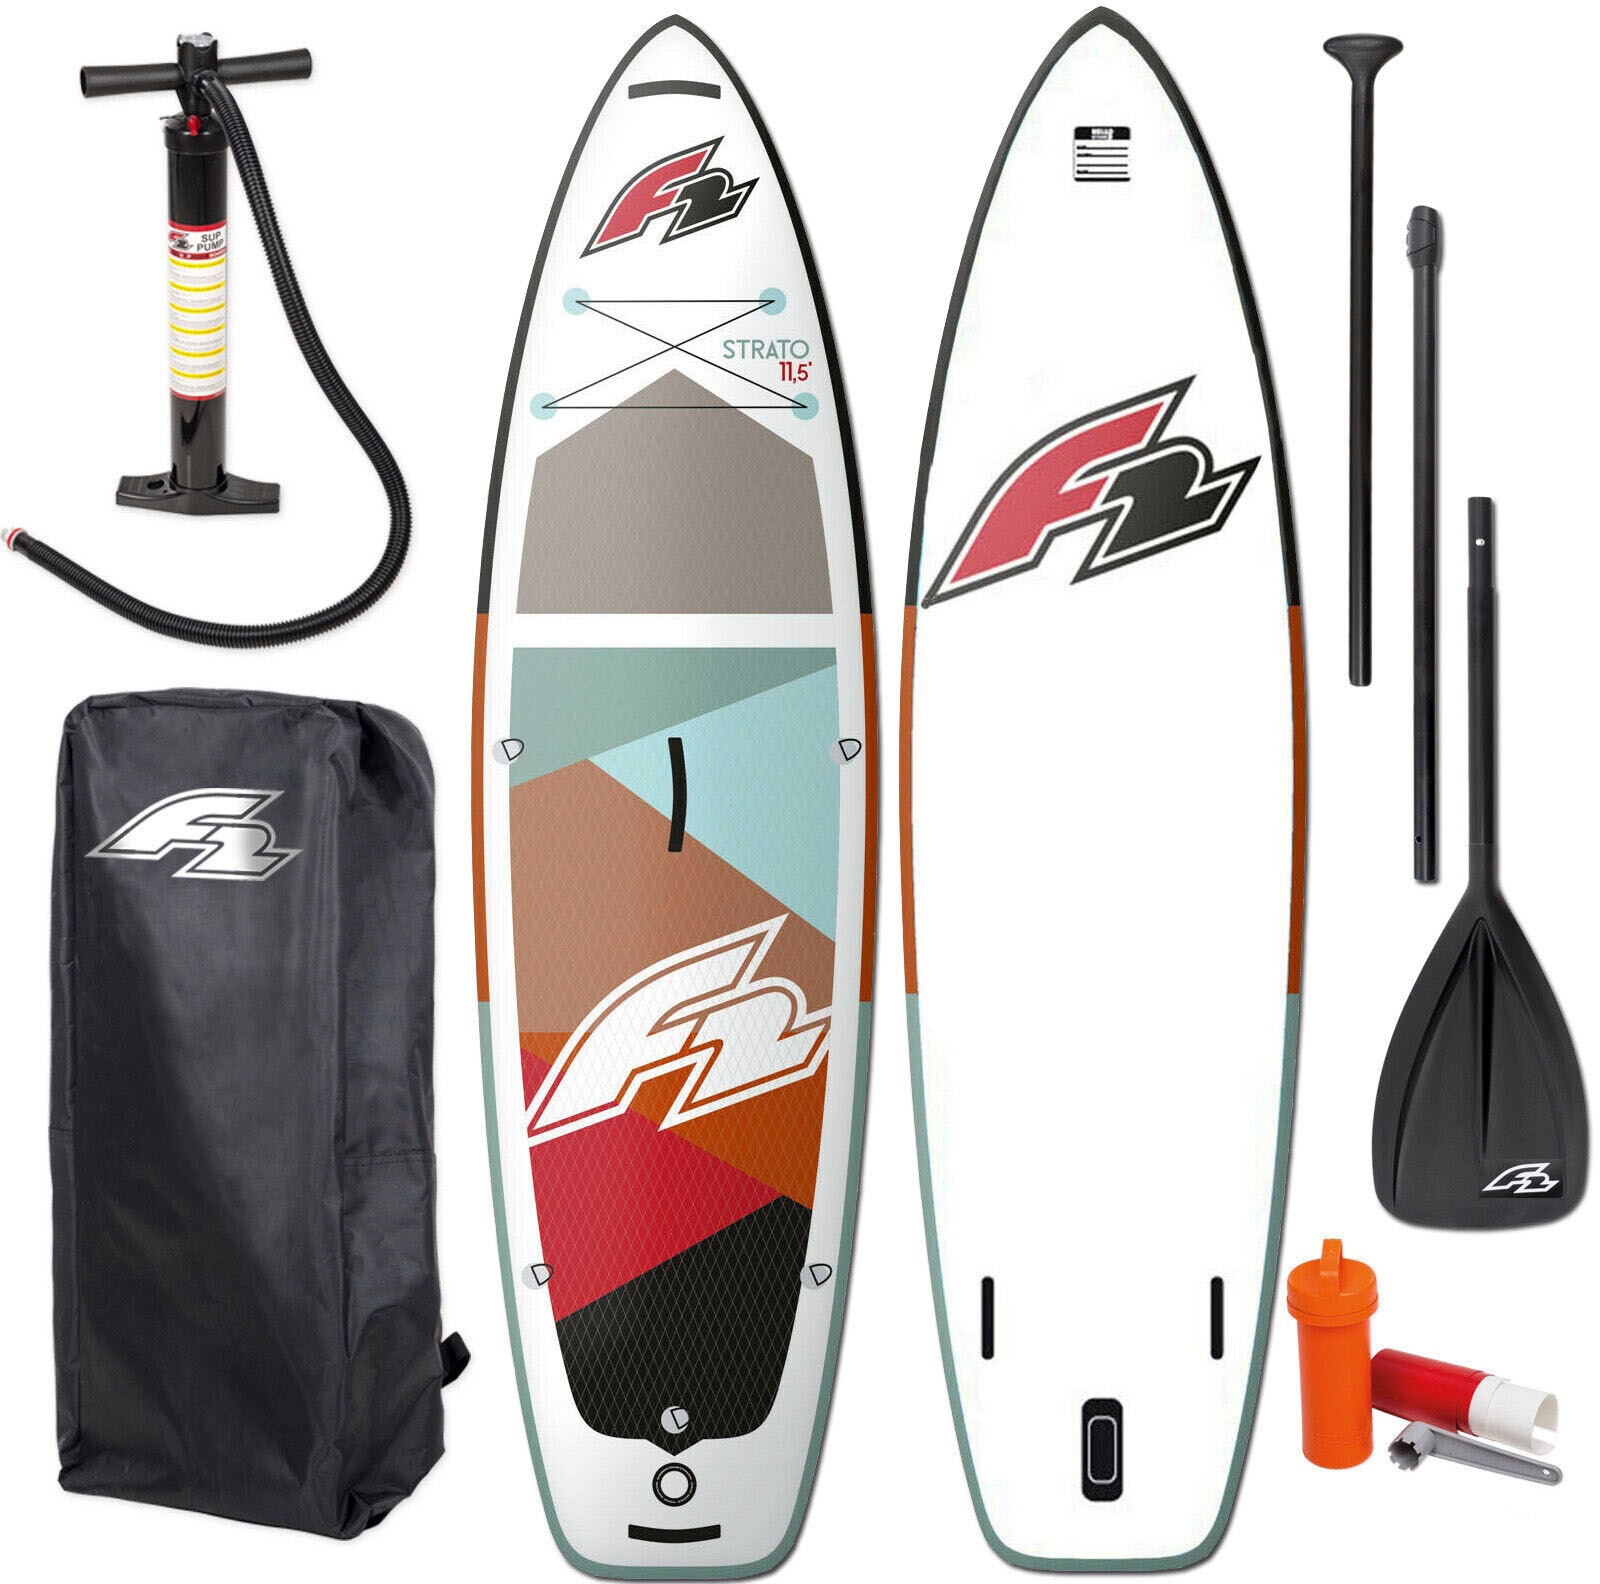 F2 Inflatable red«, 5 women kaufen OTTO (Packung, Online SUP-Board 10,5 Shop tlg.) »Strato im